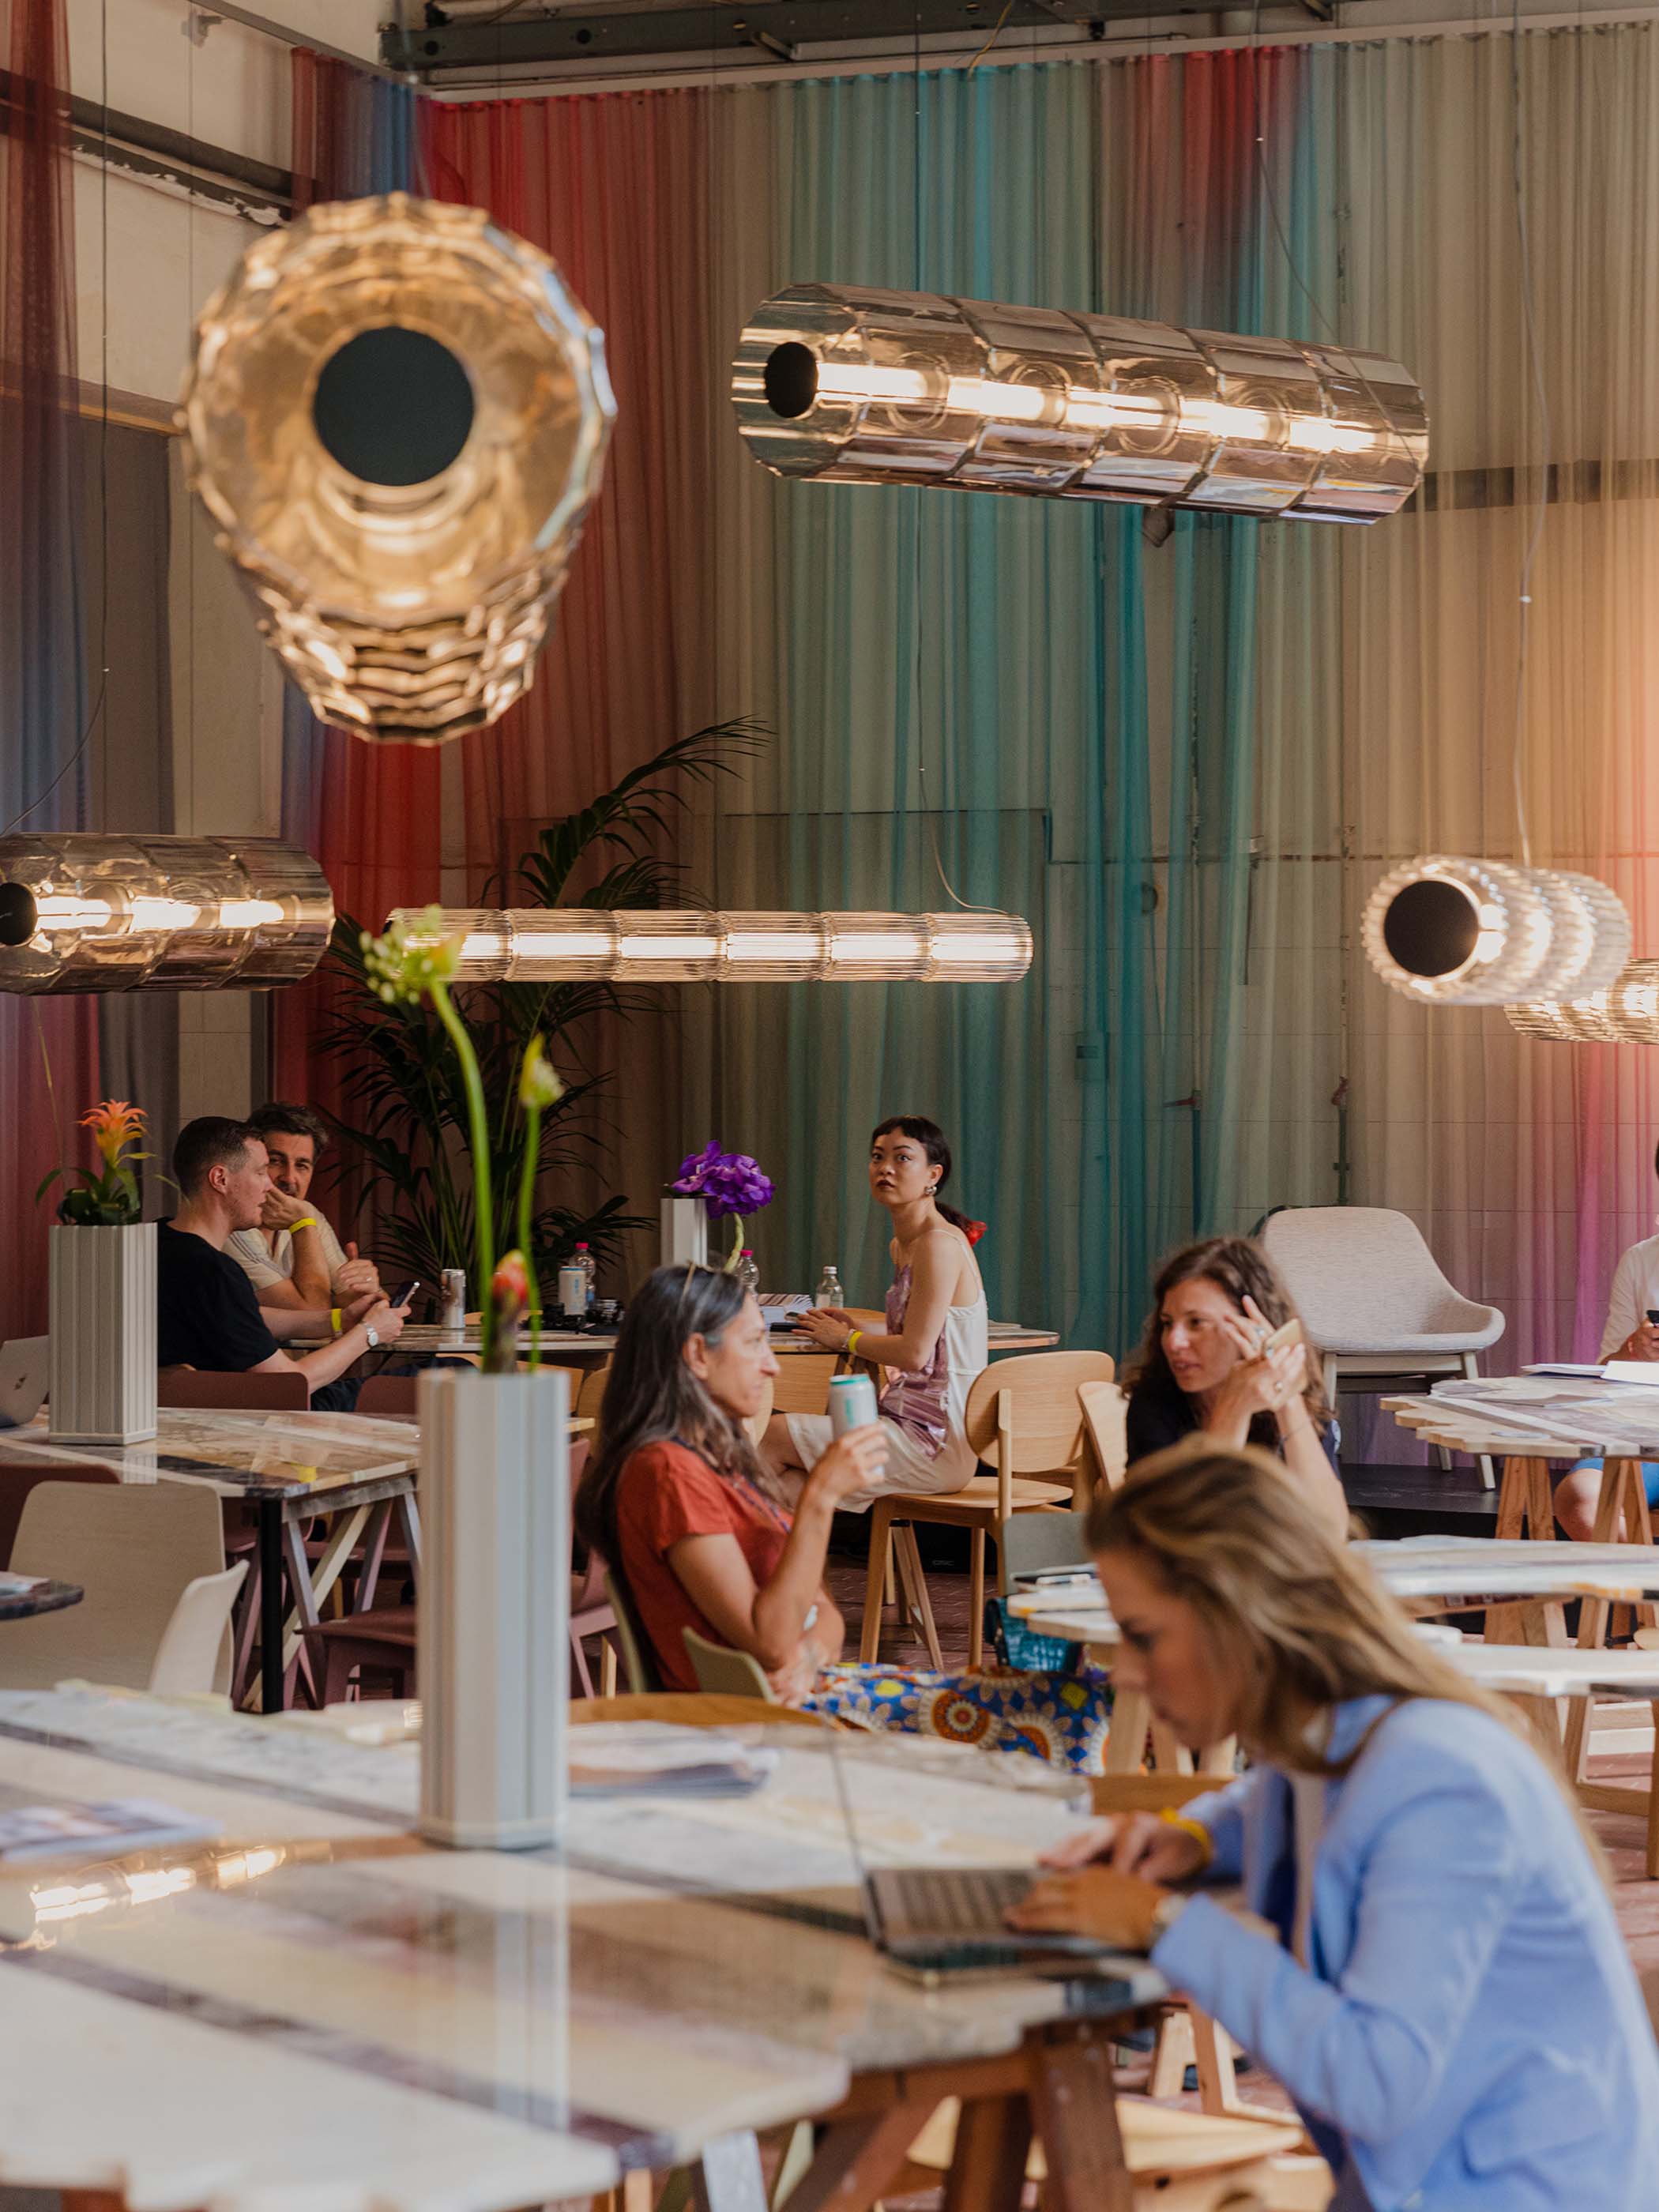 cylindrical light fixtures hang from ceiling in cafe space